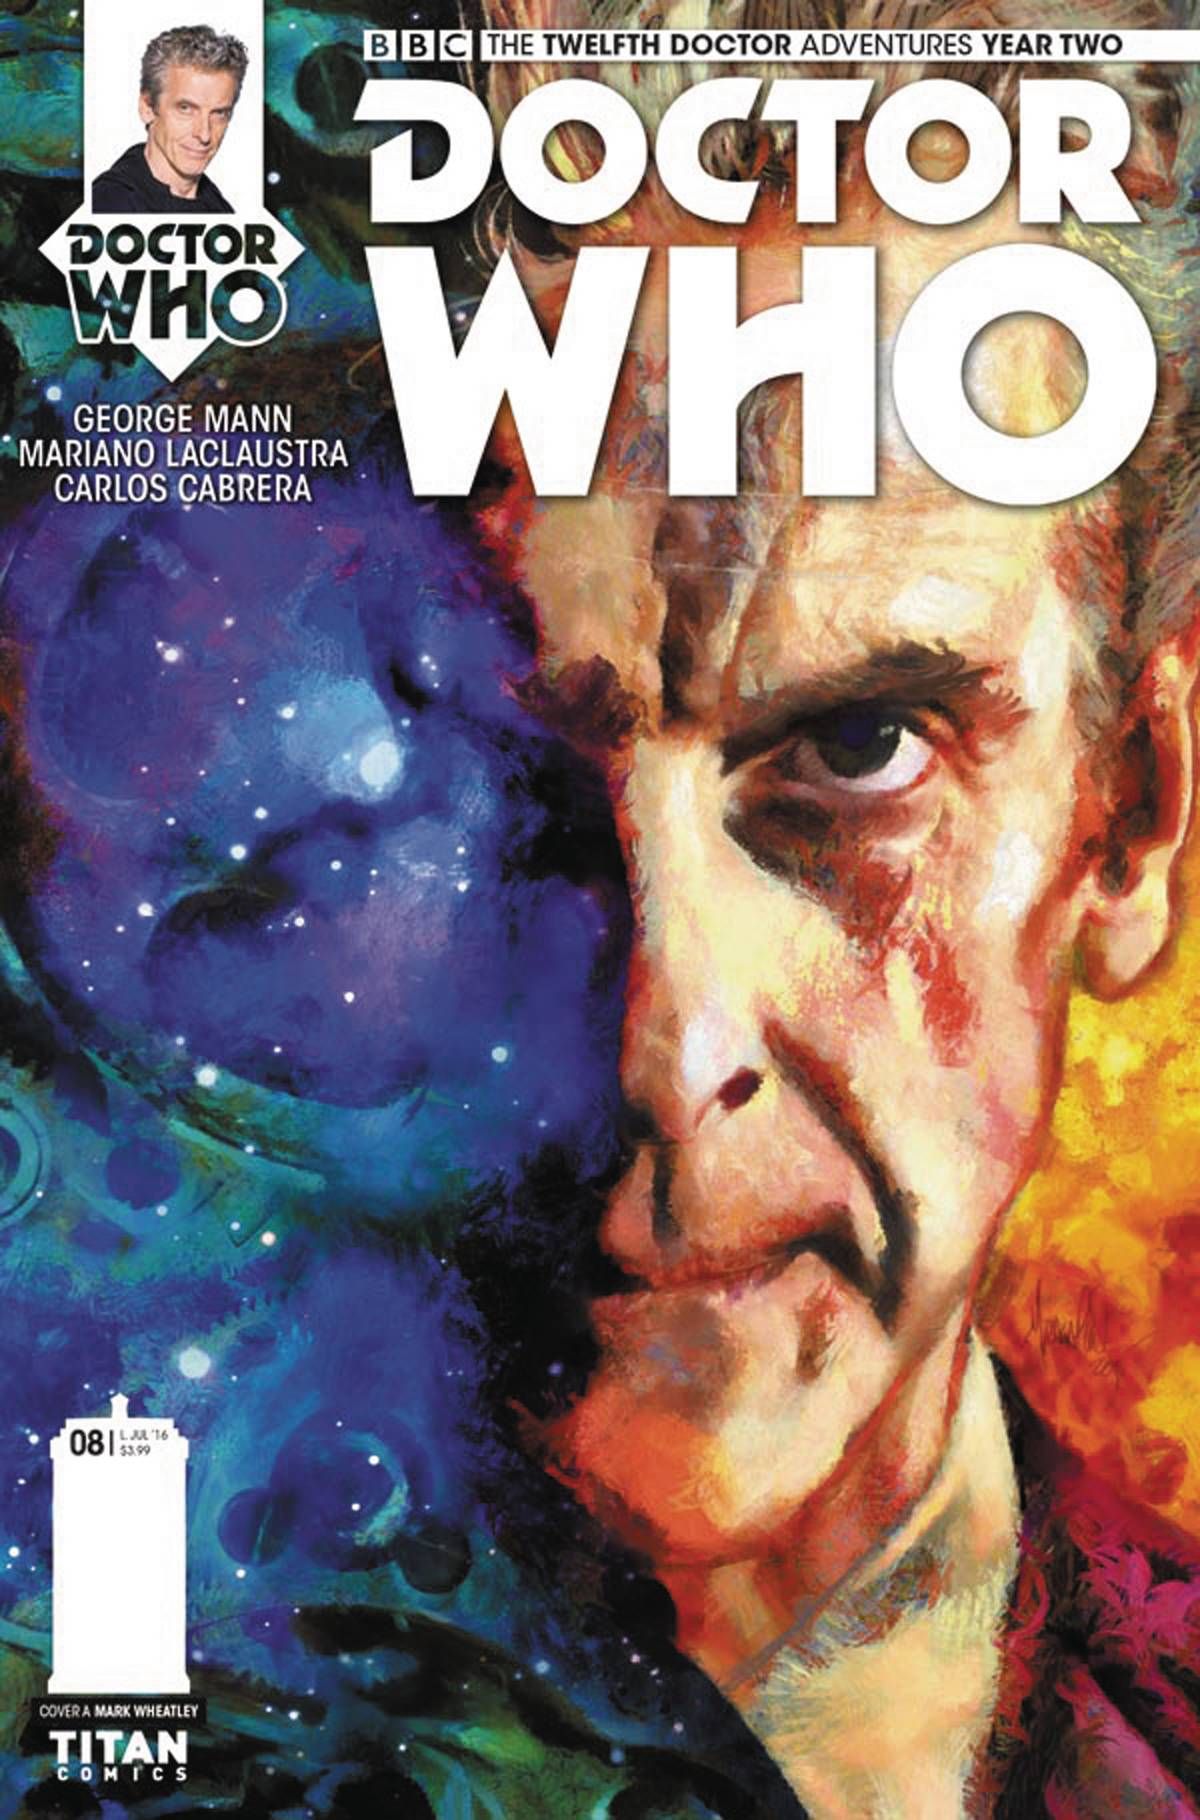 Doctor who: The Twelfth Doctor Year Two #8 Comic